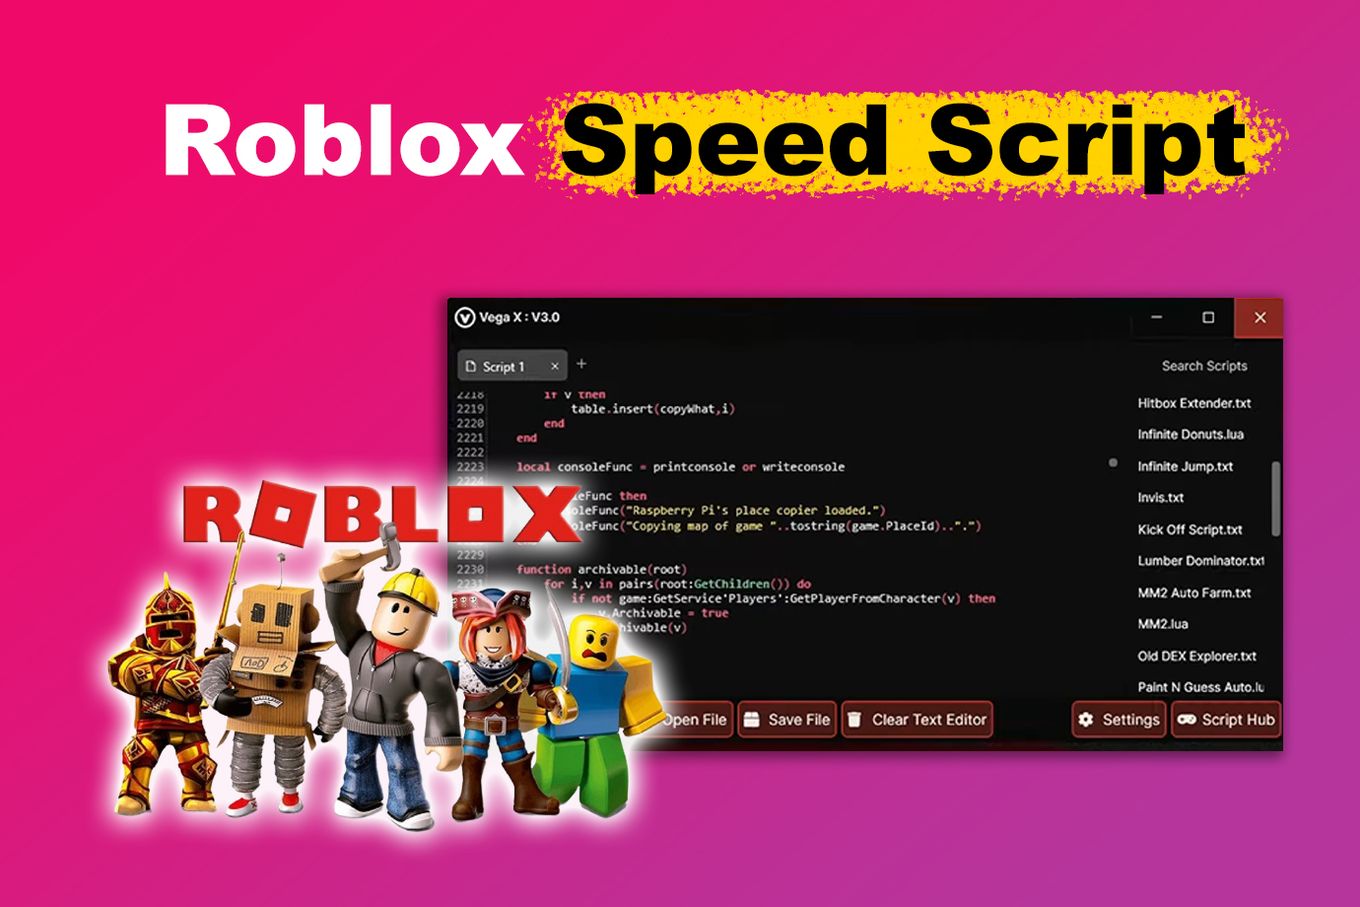 Roblox Hacks Free Download - The Best Cheats, Scripts, Codes » Page 2